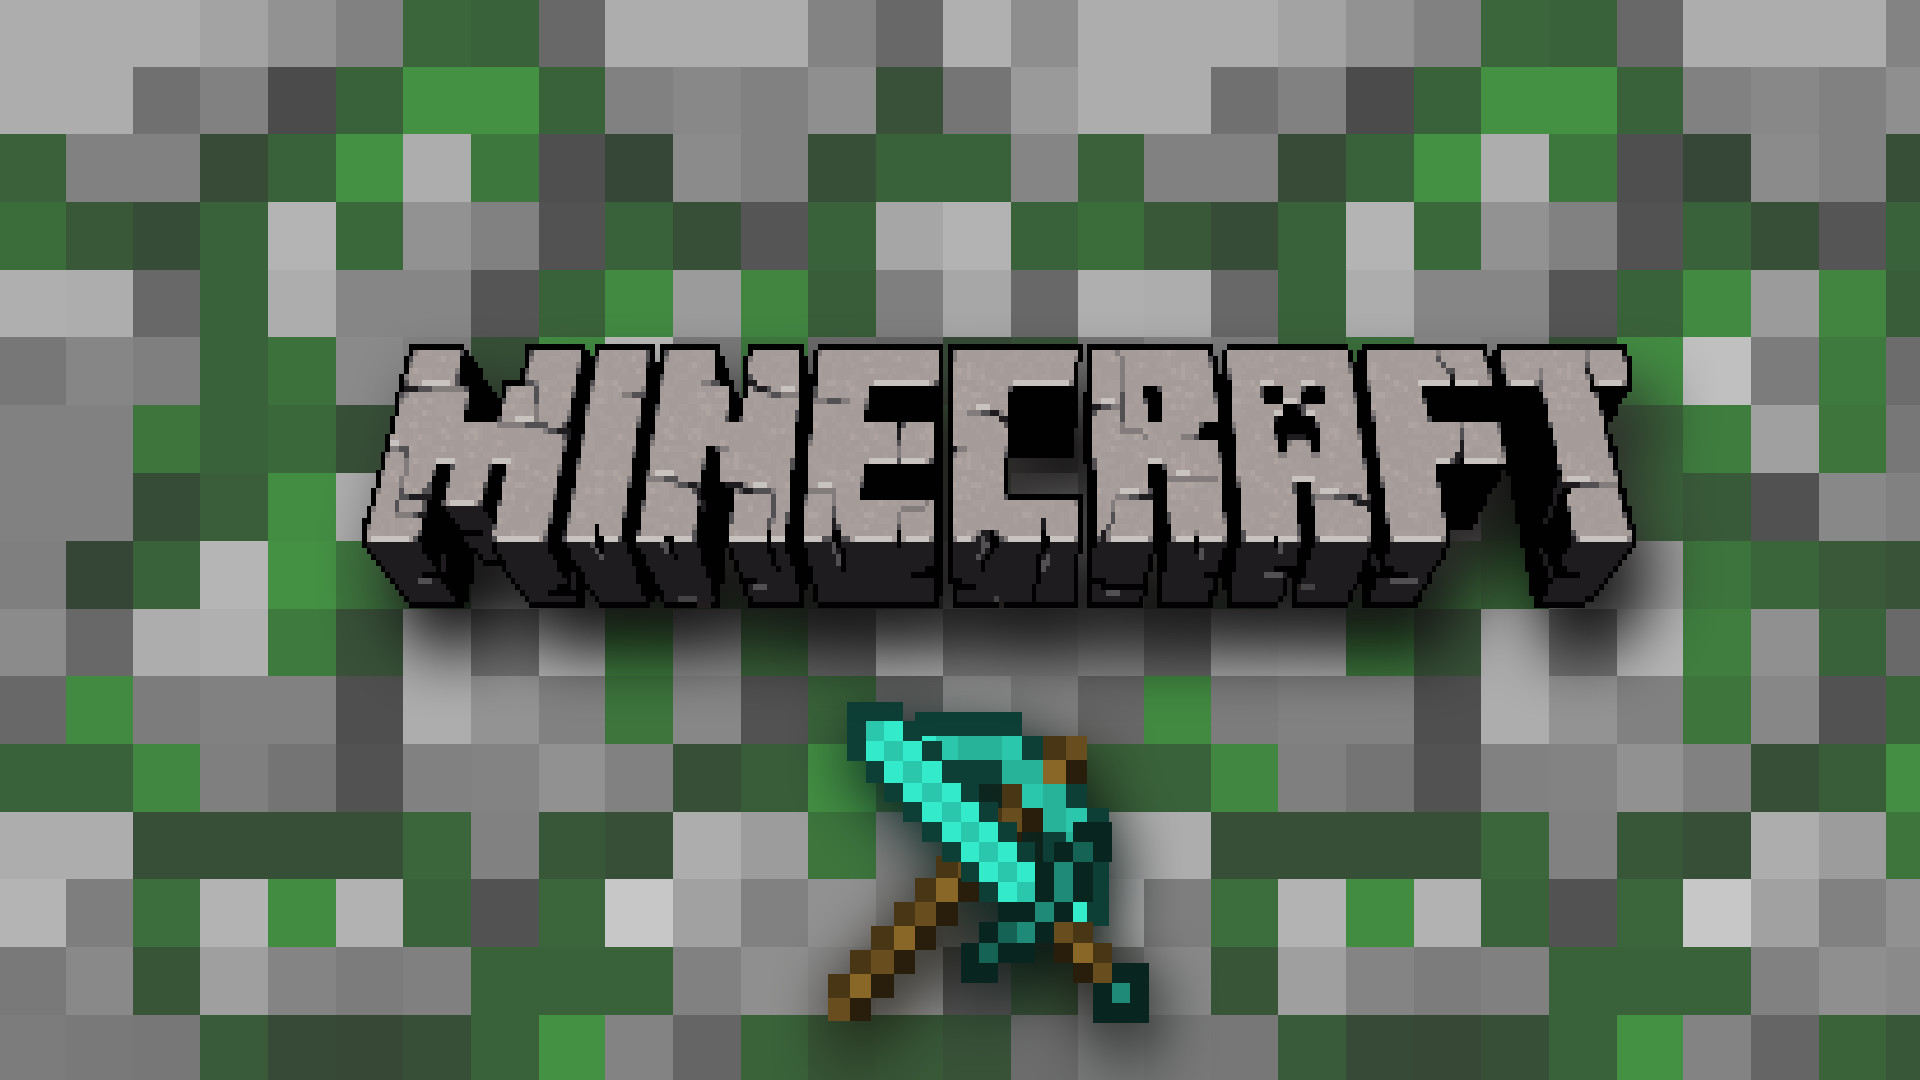 My Minecraft Wallpapers Fan Art Show Your Creation Minecraft Forum Minecraft Forum 1920x1080